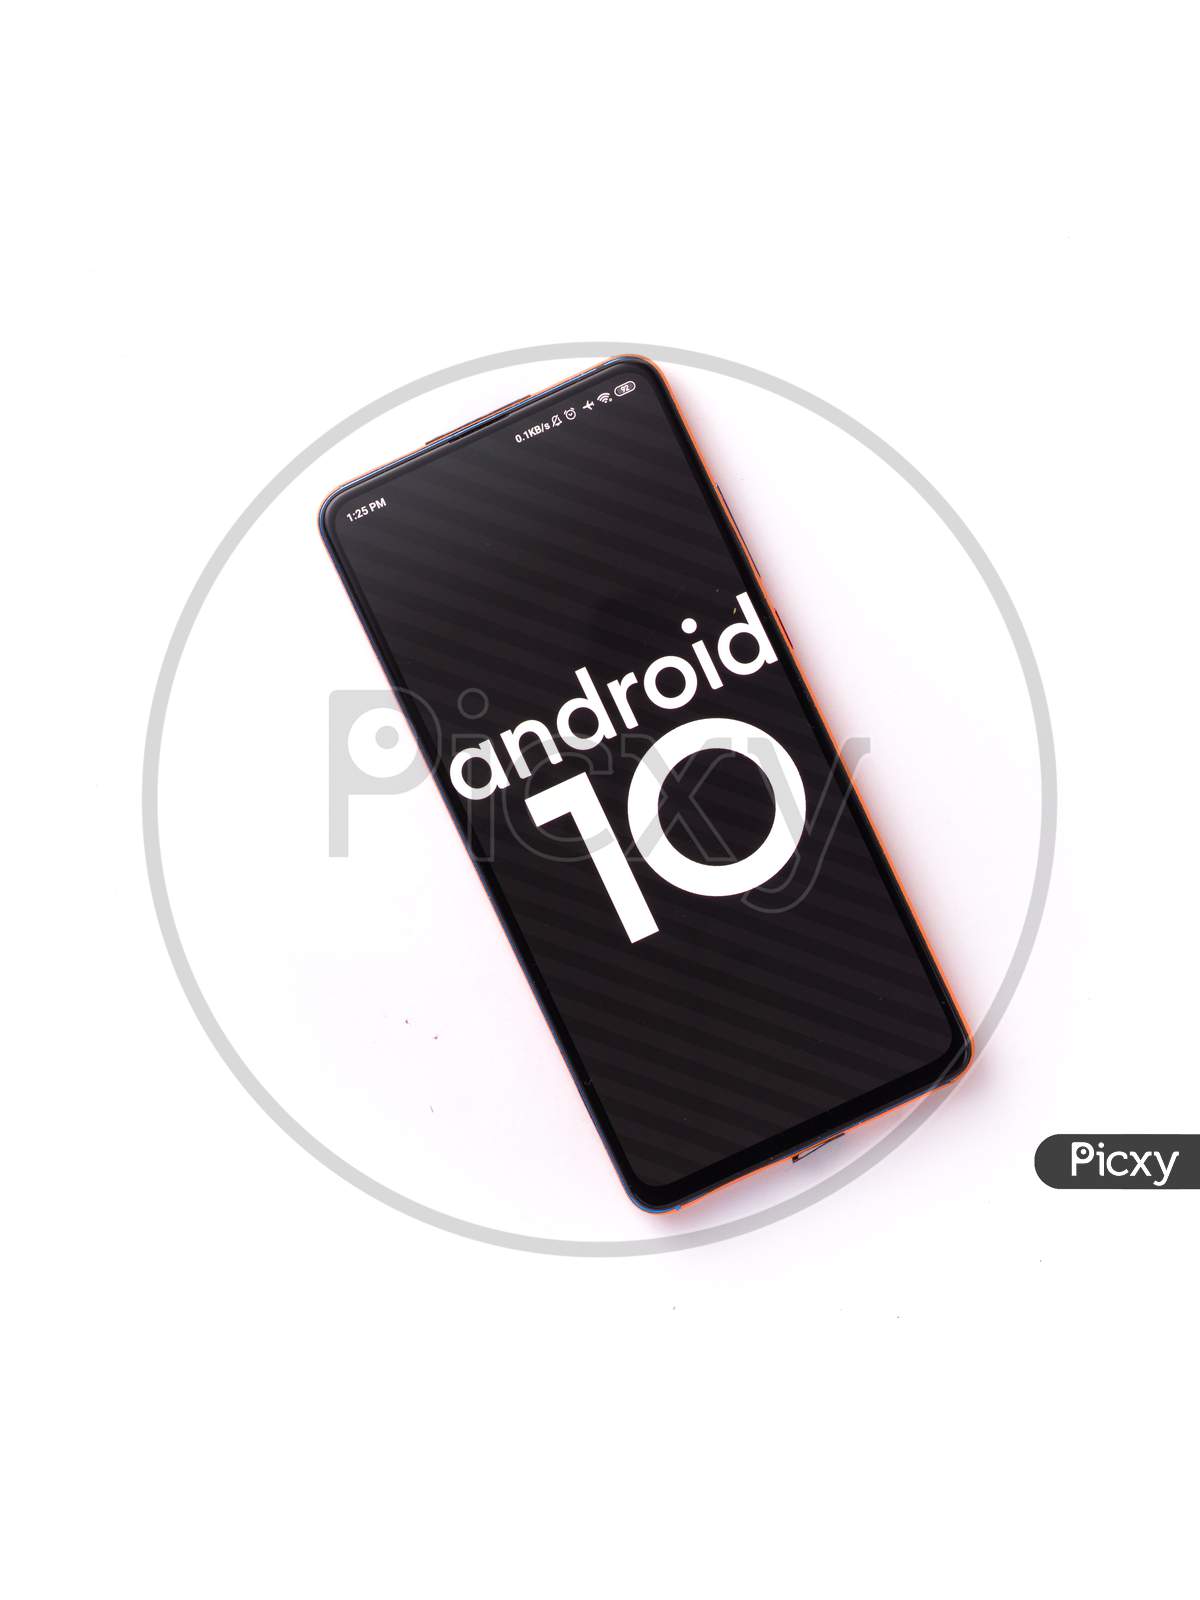 Phone with android 10 Q logo which is the newest operating system of android. wednesday, february 26,2020, Assam, india.